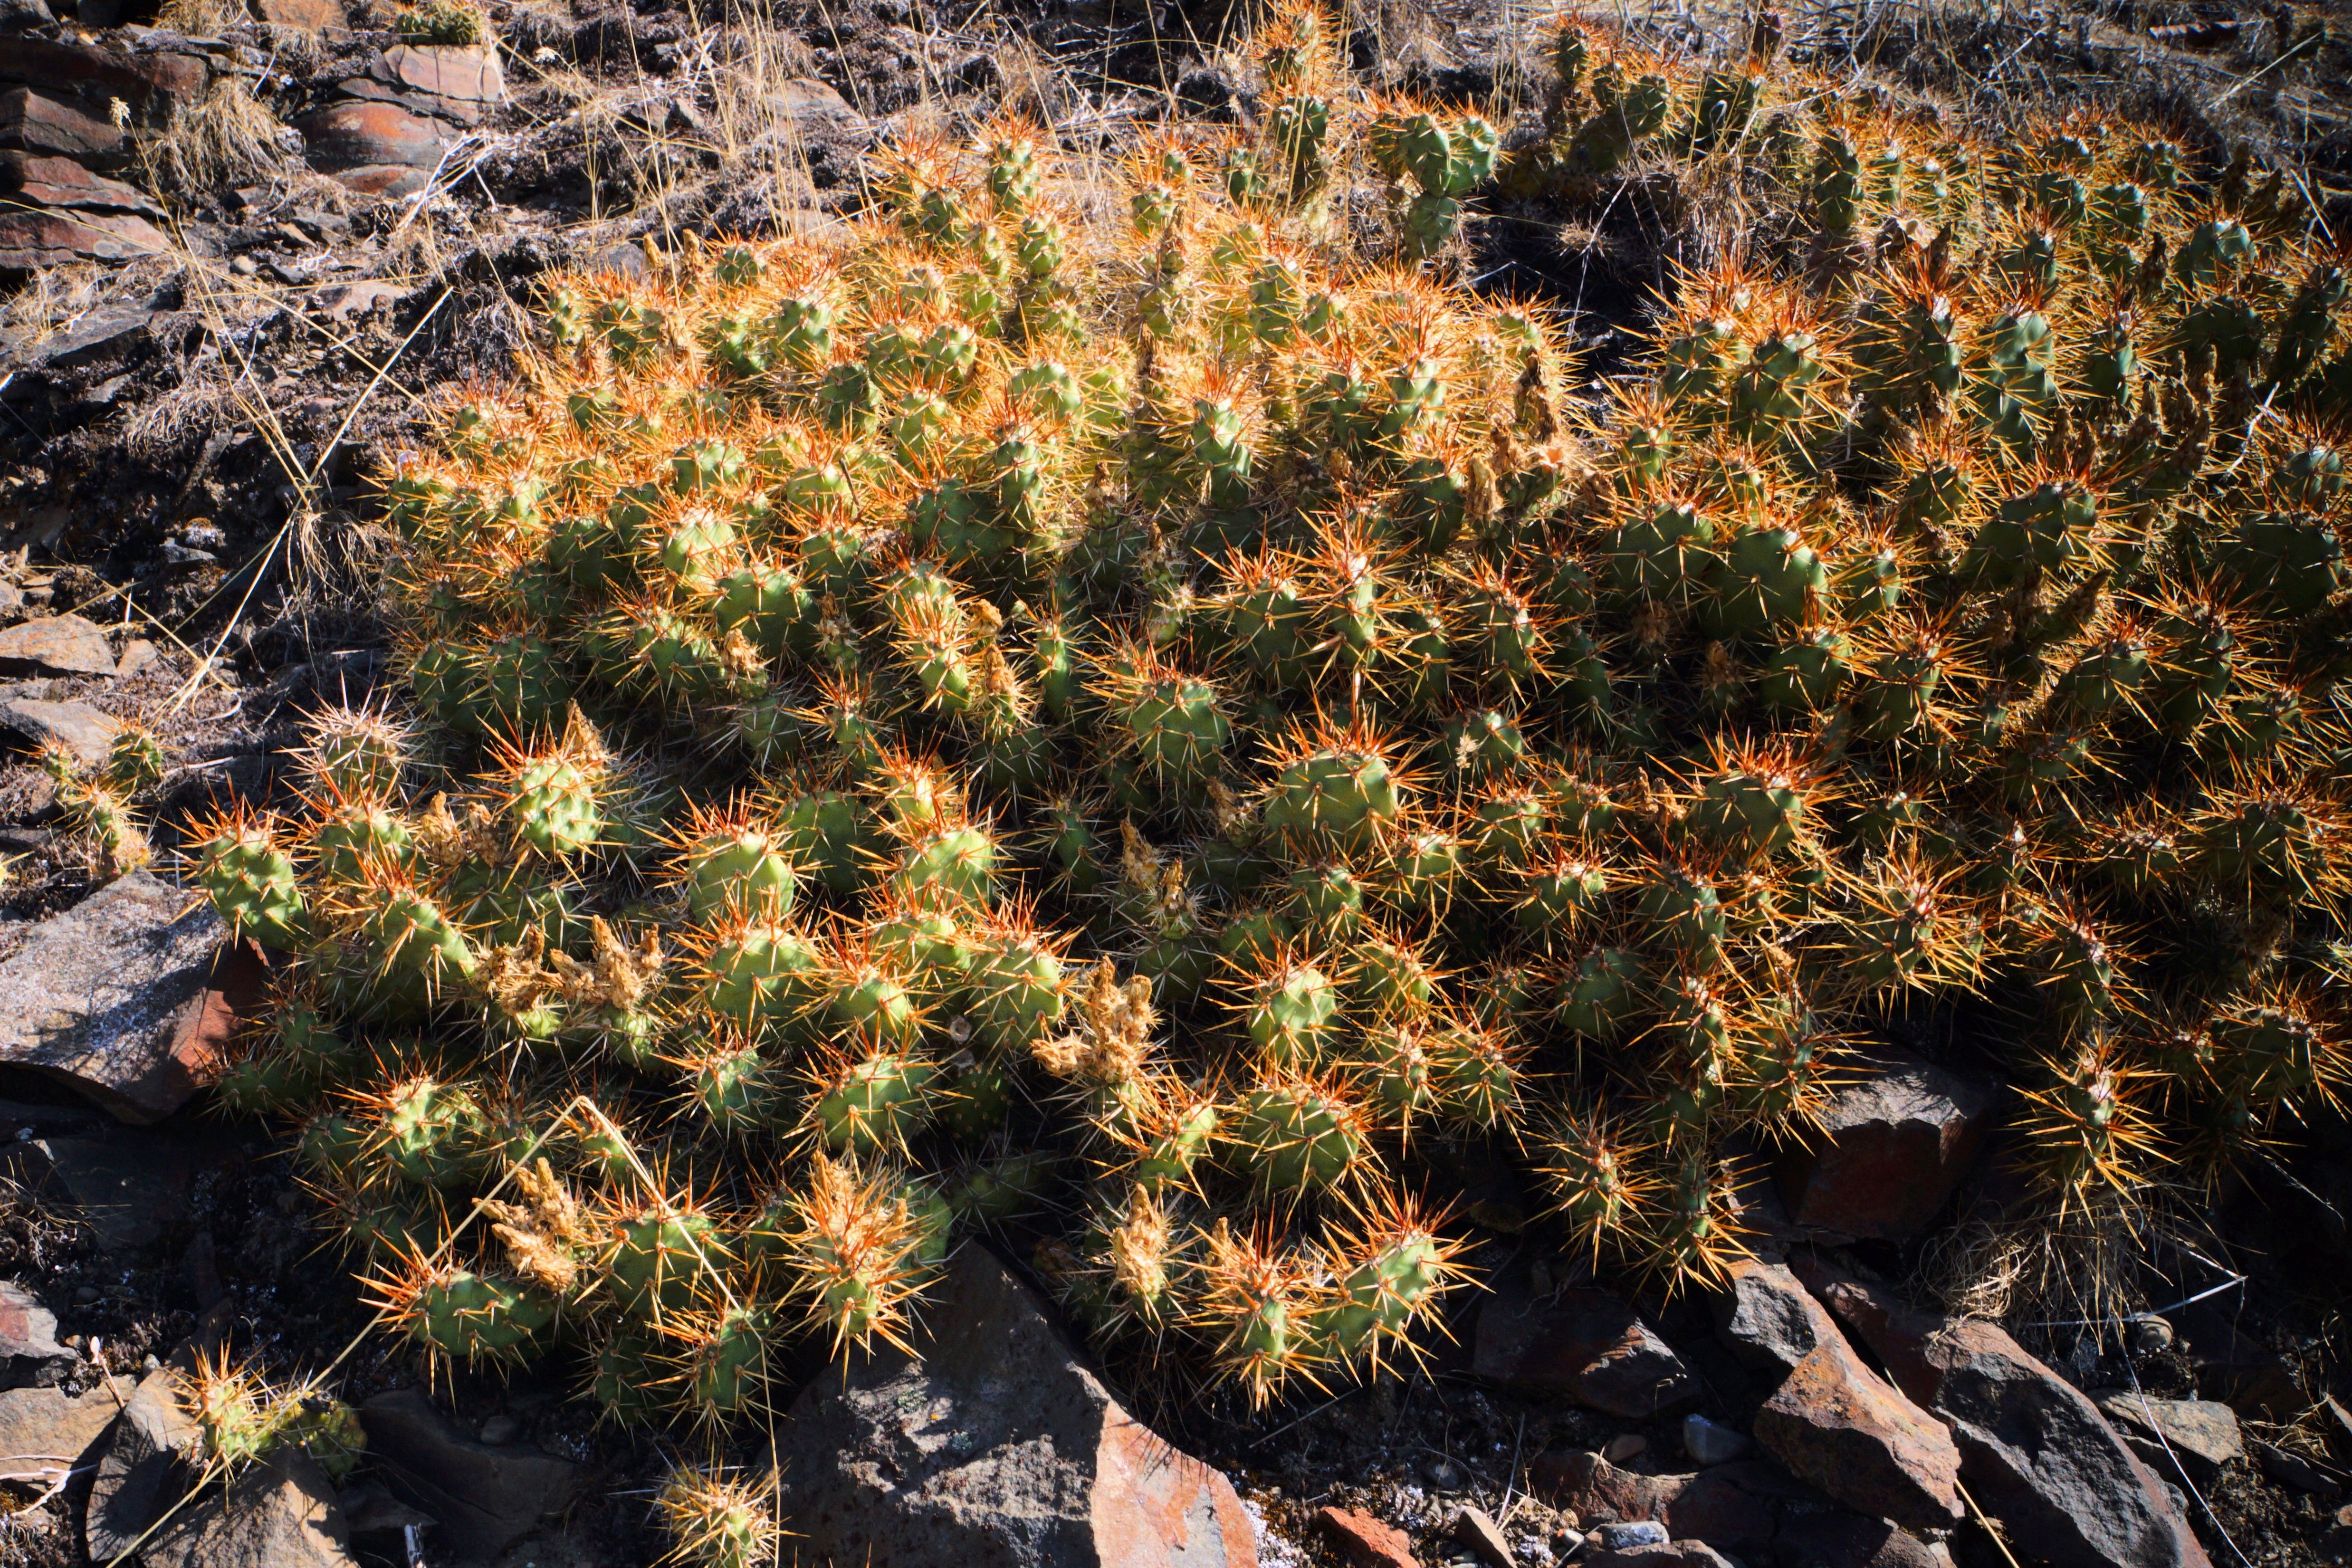 6 August 2014 – Wild Cactus Discovered in Spokane County | Bill's ...